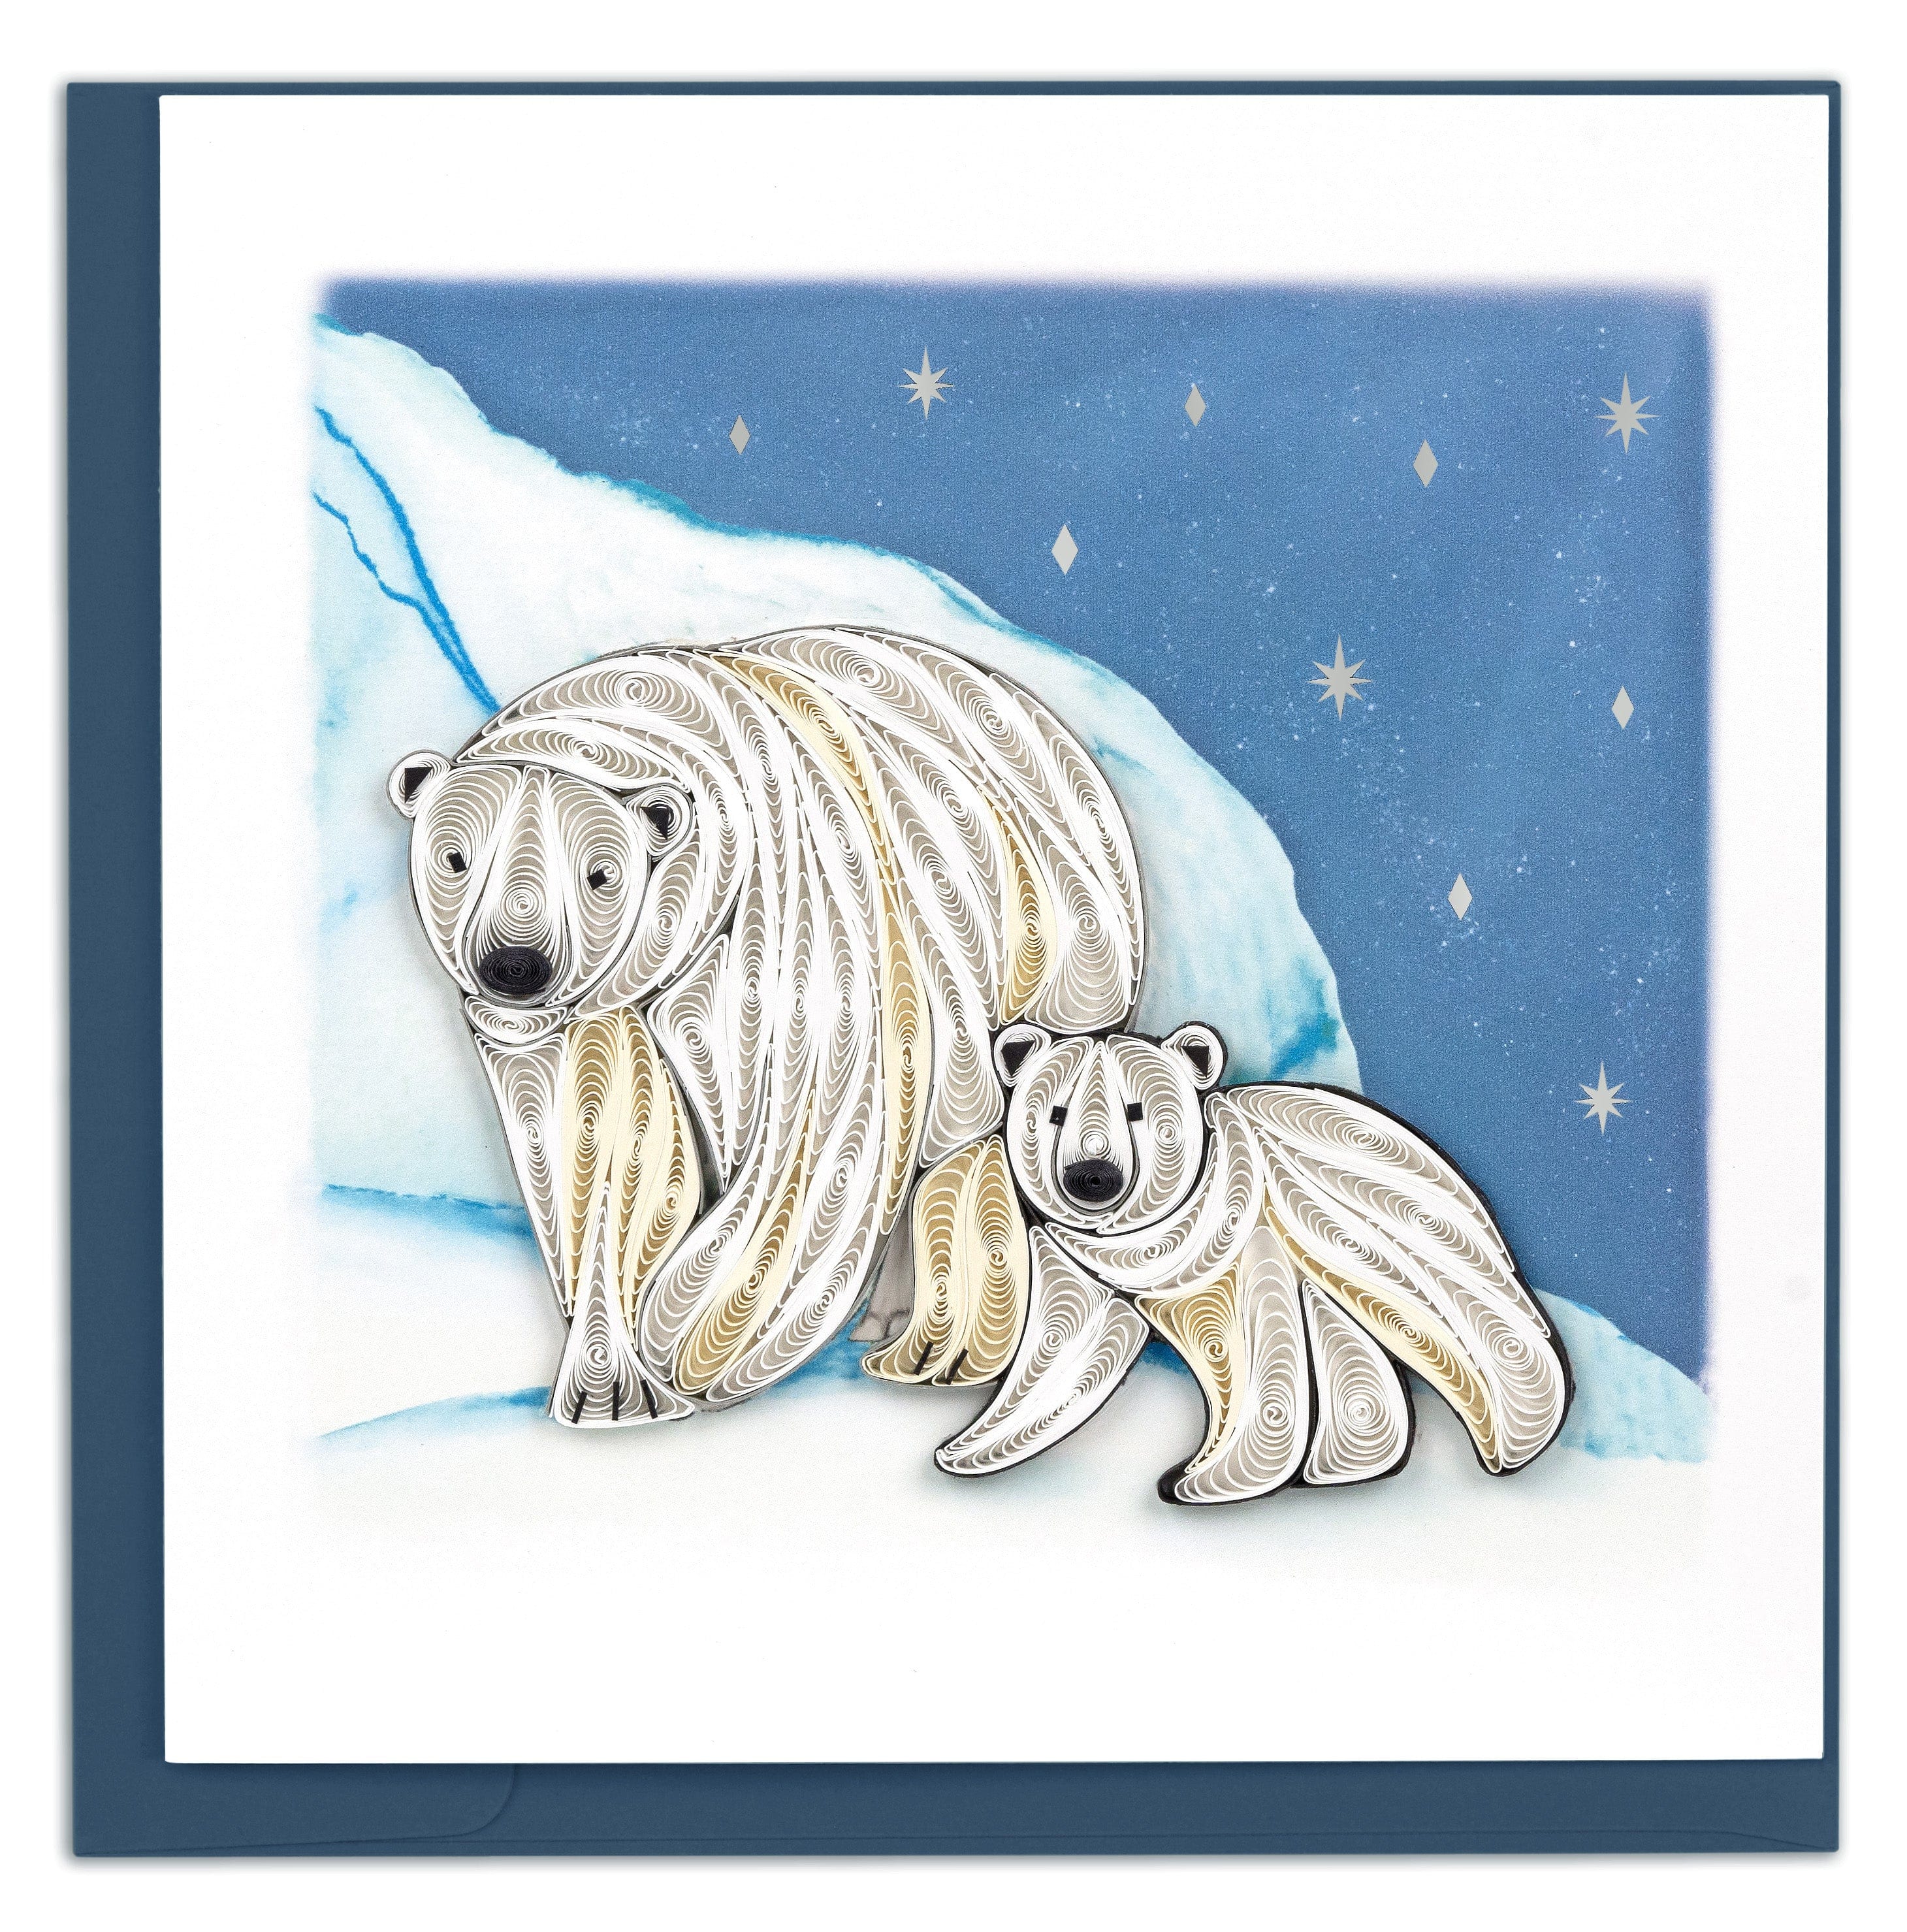 Quilled Creations - Quilling Kit - Arctic Buddies